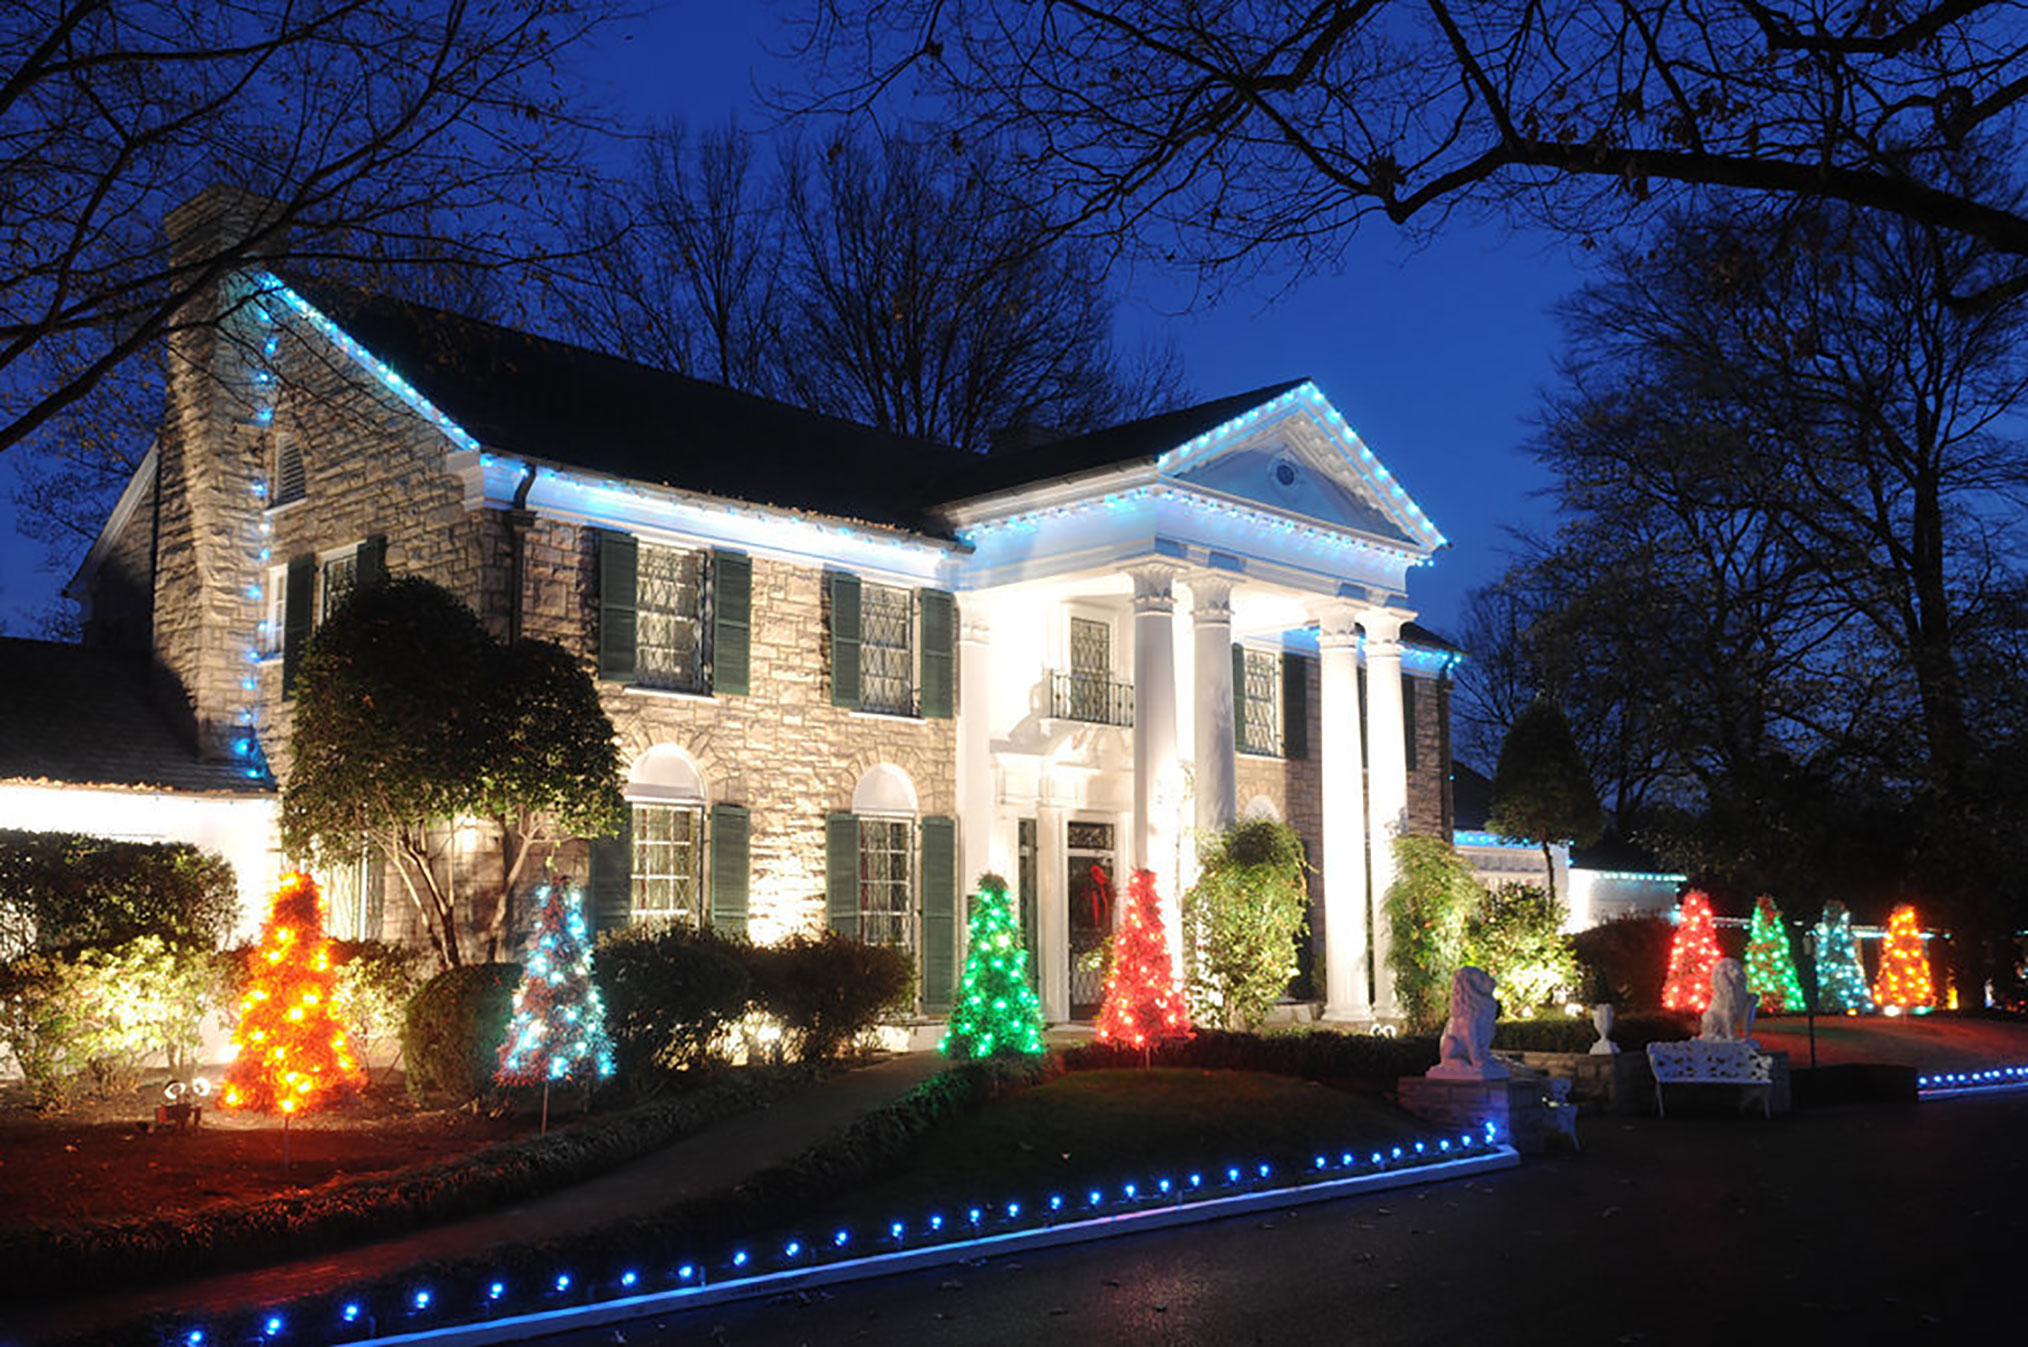 NBC Celebrates Elvis With ‘Christmas at Graceland’ Musical Special